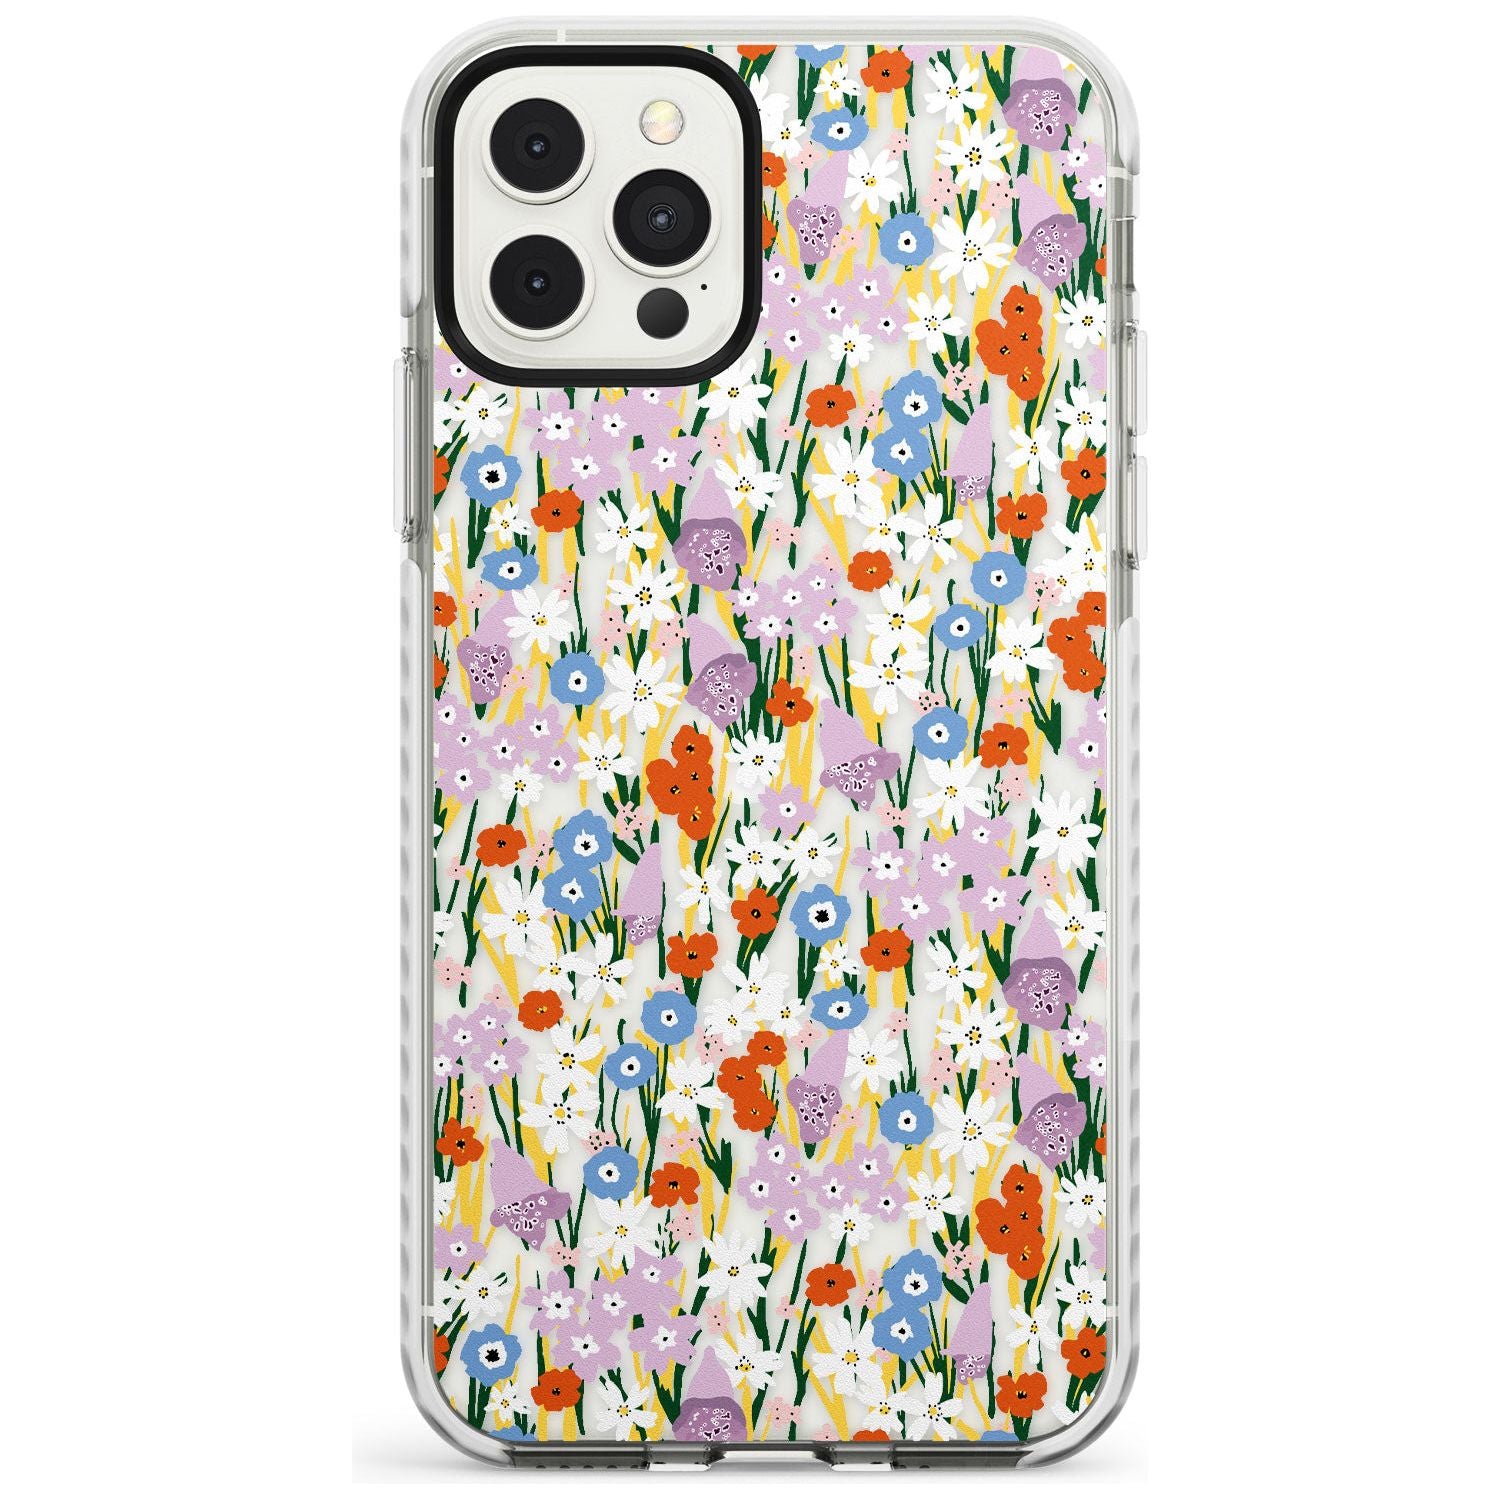 Energetic Floral Mix: Transparent Slim TPU Phone Case for iPhone 11 Pro Max